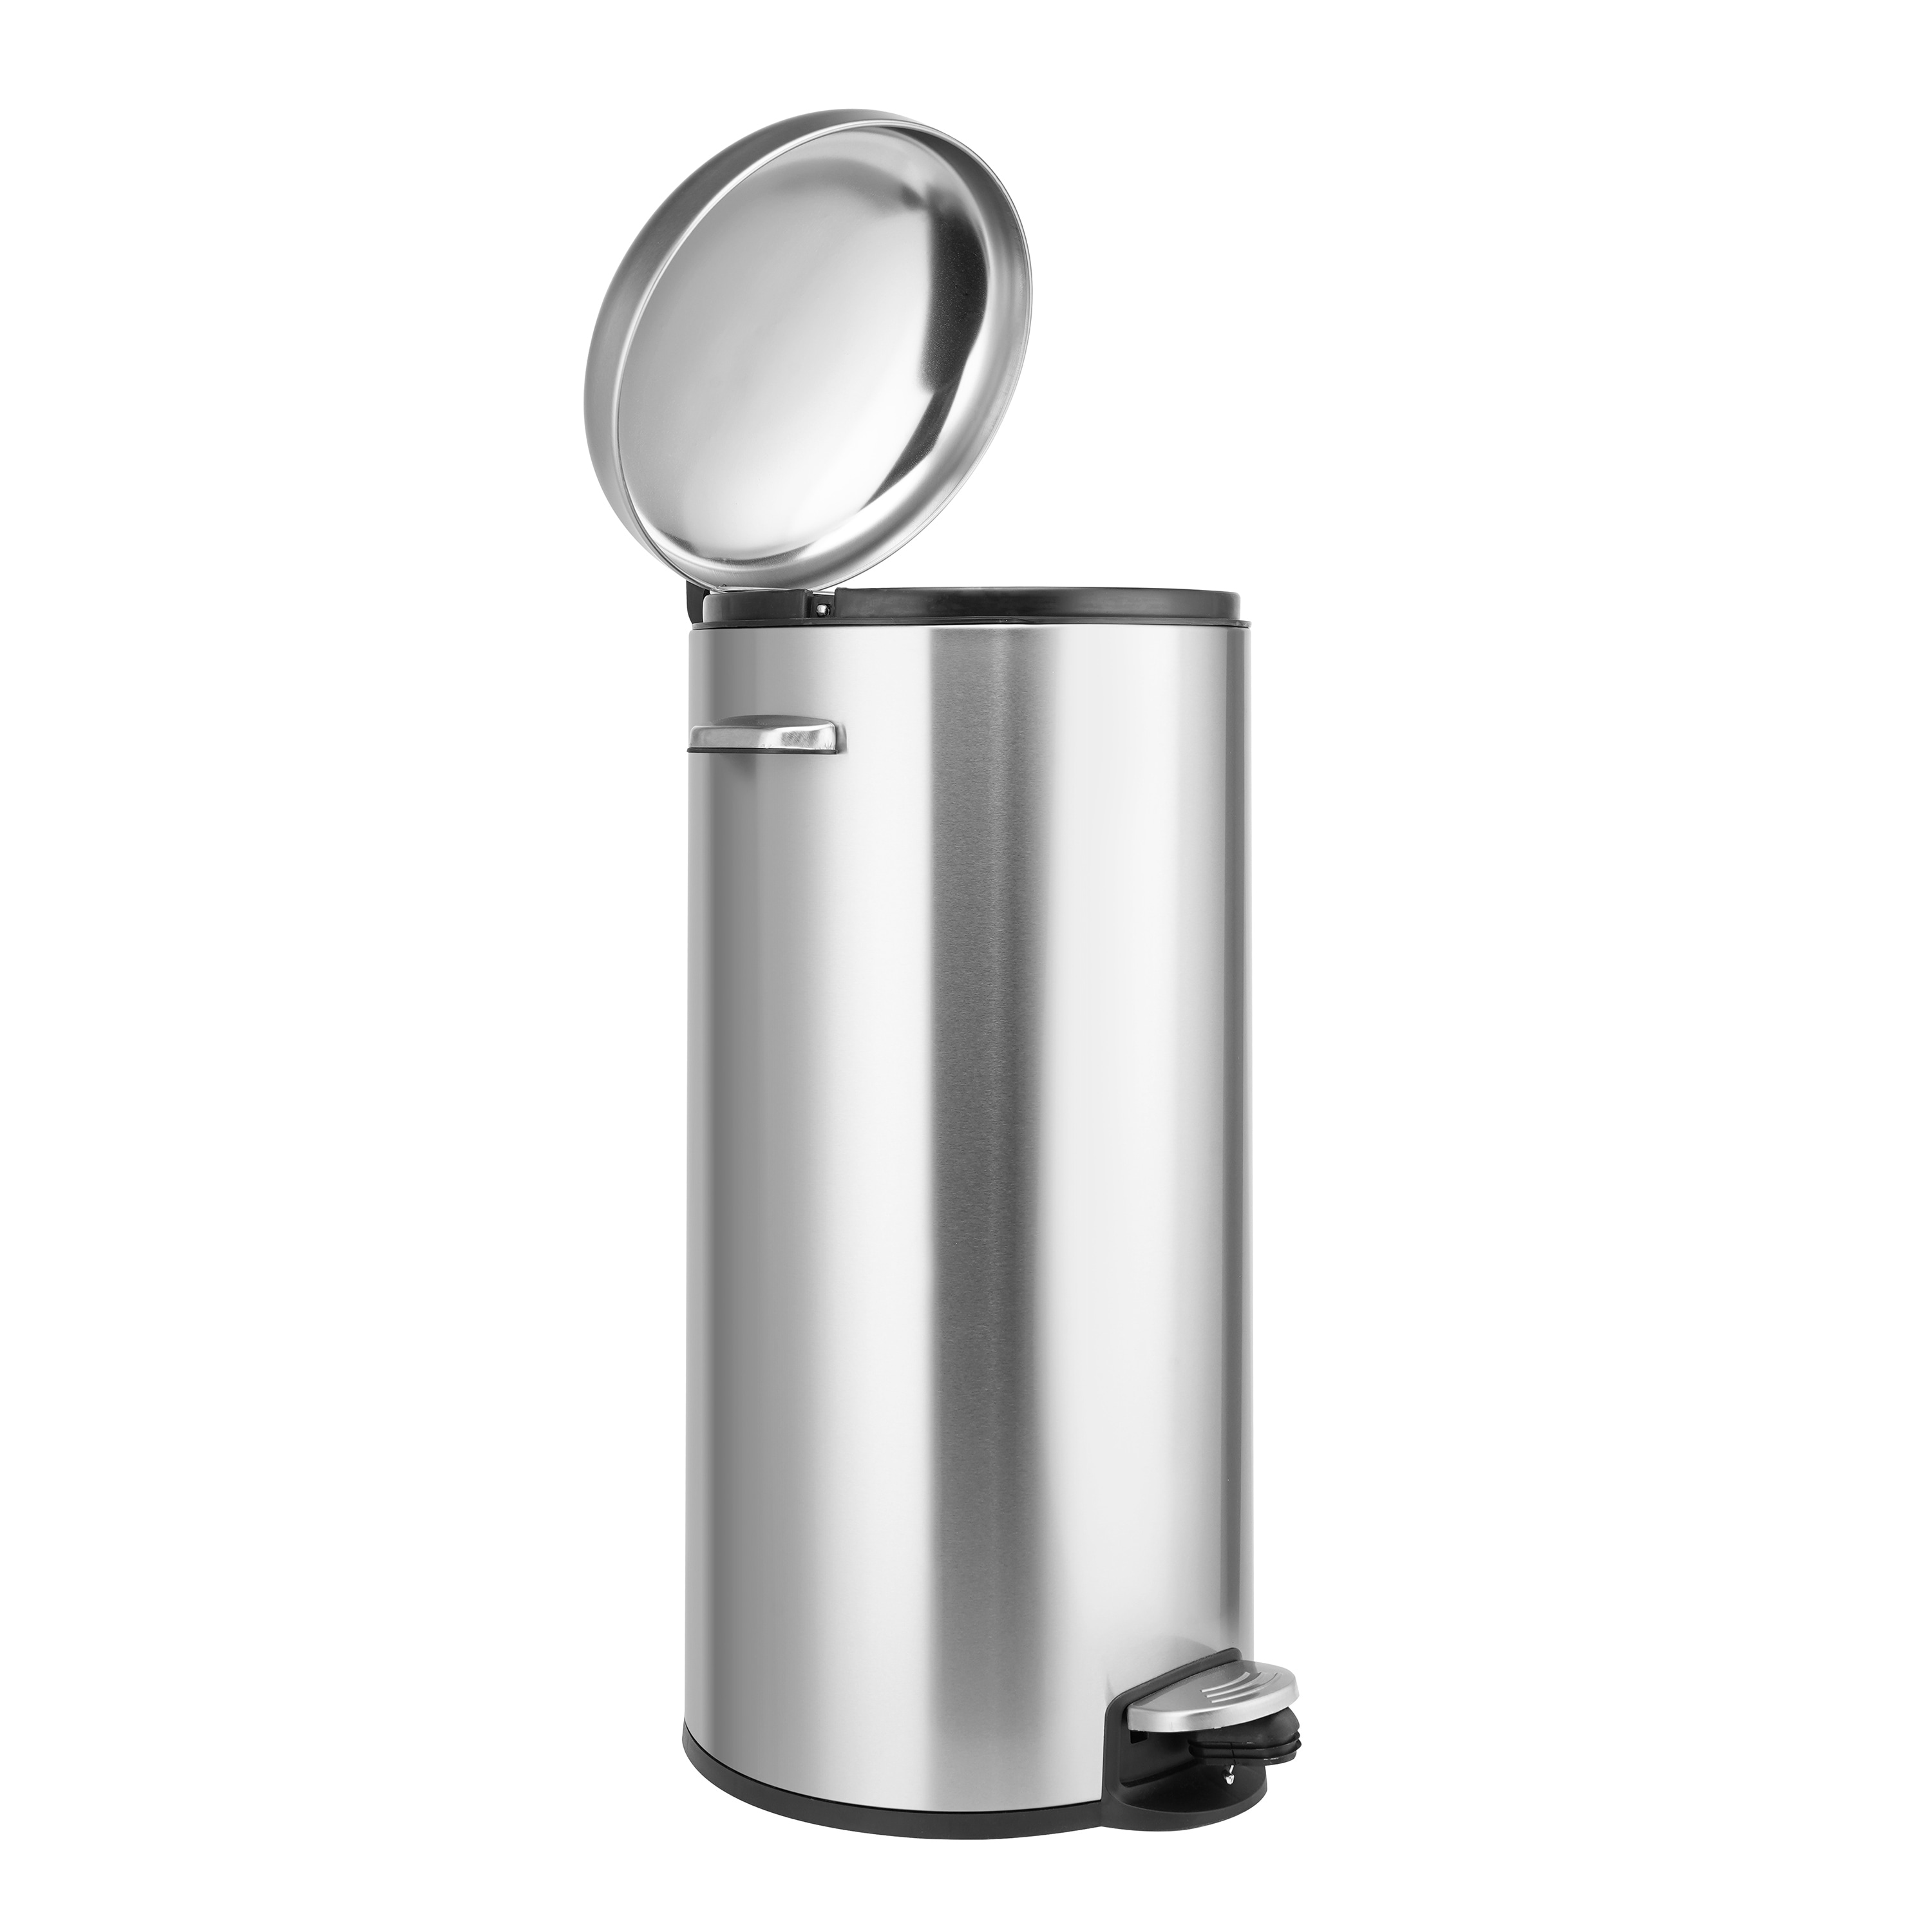 https://ak1.ostkcdn.com/images/products/is/images/direct/a5744ab2386bc8830e7e77e709d7455c44d8f9ca/Innovaze-8-Gallon-Stainless-Steel-Round-Shape-Step-on-Kitchen-Trash-Can.jpg